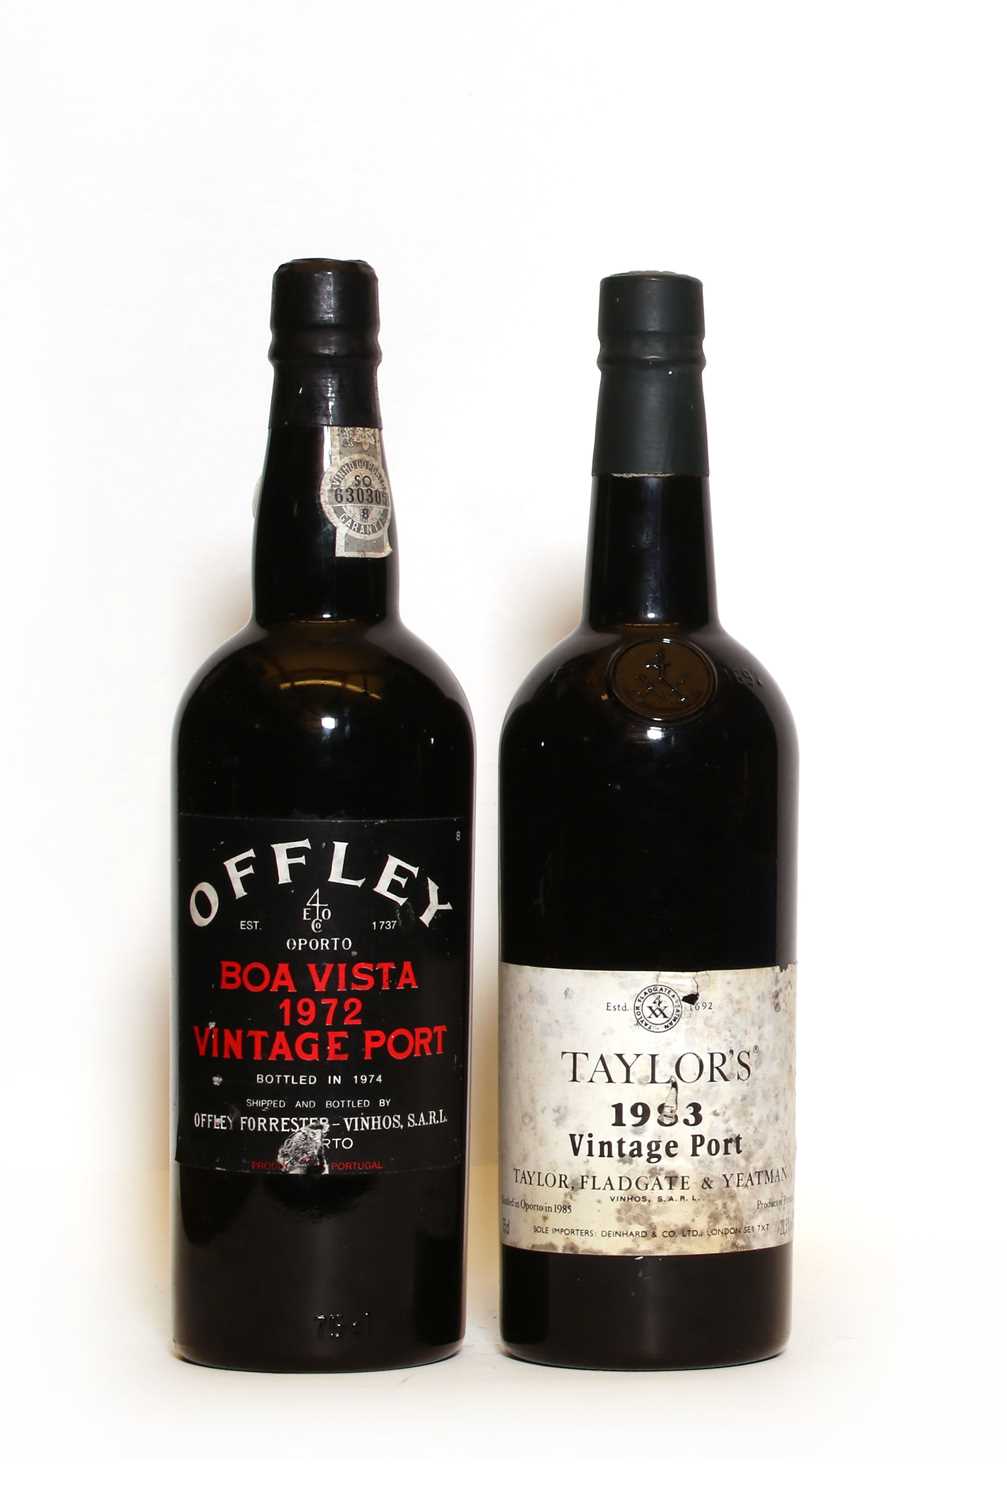 Lot 171 - Taylors, Vintage Port, 1983, one bottle and Offley, Boa Vista, Vintage Port, 1972, one bottle